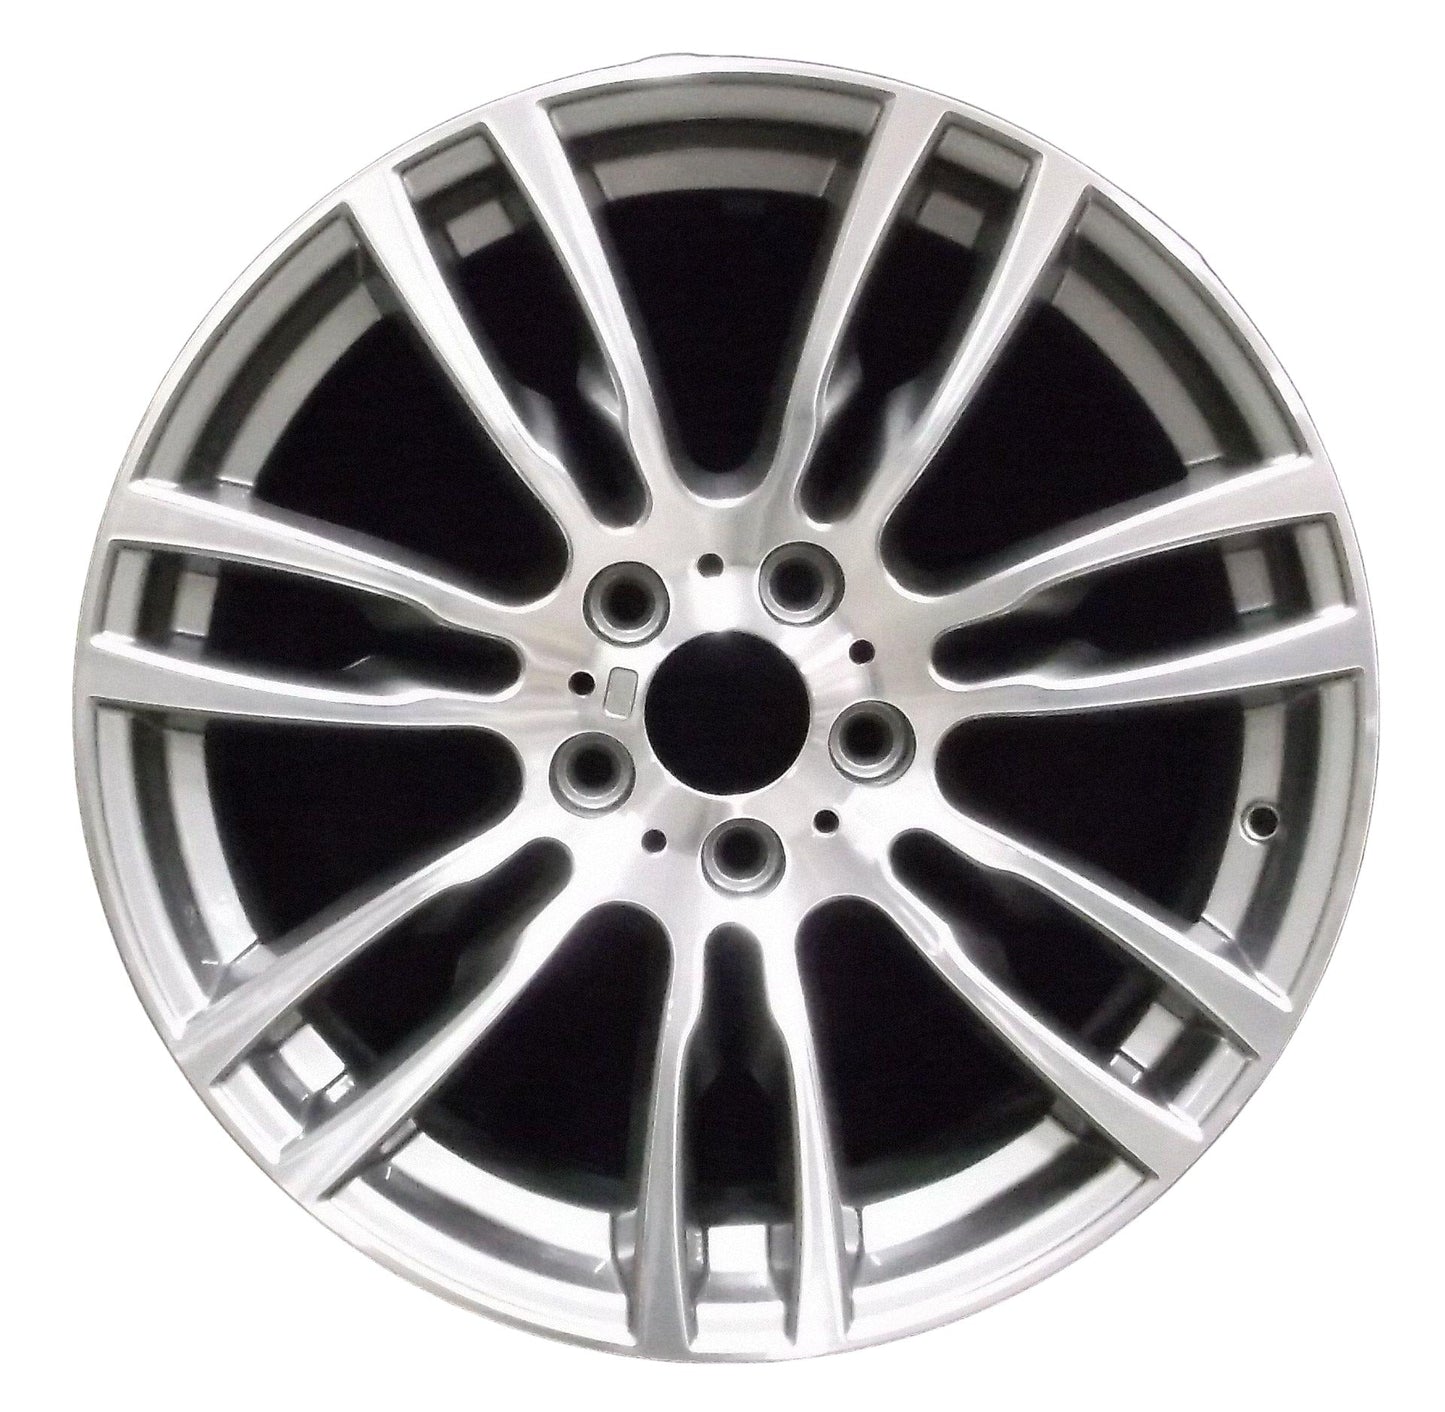 BMW 335i  2012, 2013, 2014, 2015 Factory OEM Car Wheel Size 19x8.5 Alloy WAO.71623RE.LC25.MABRT